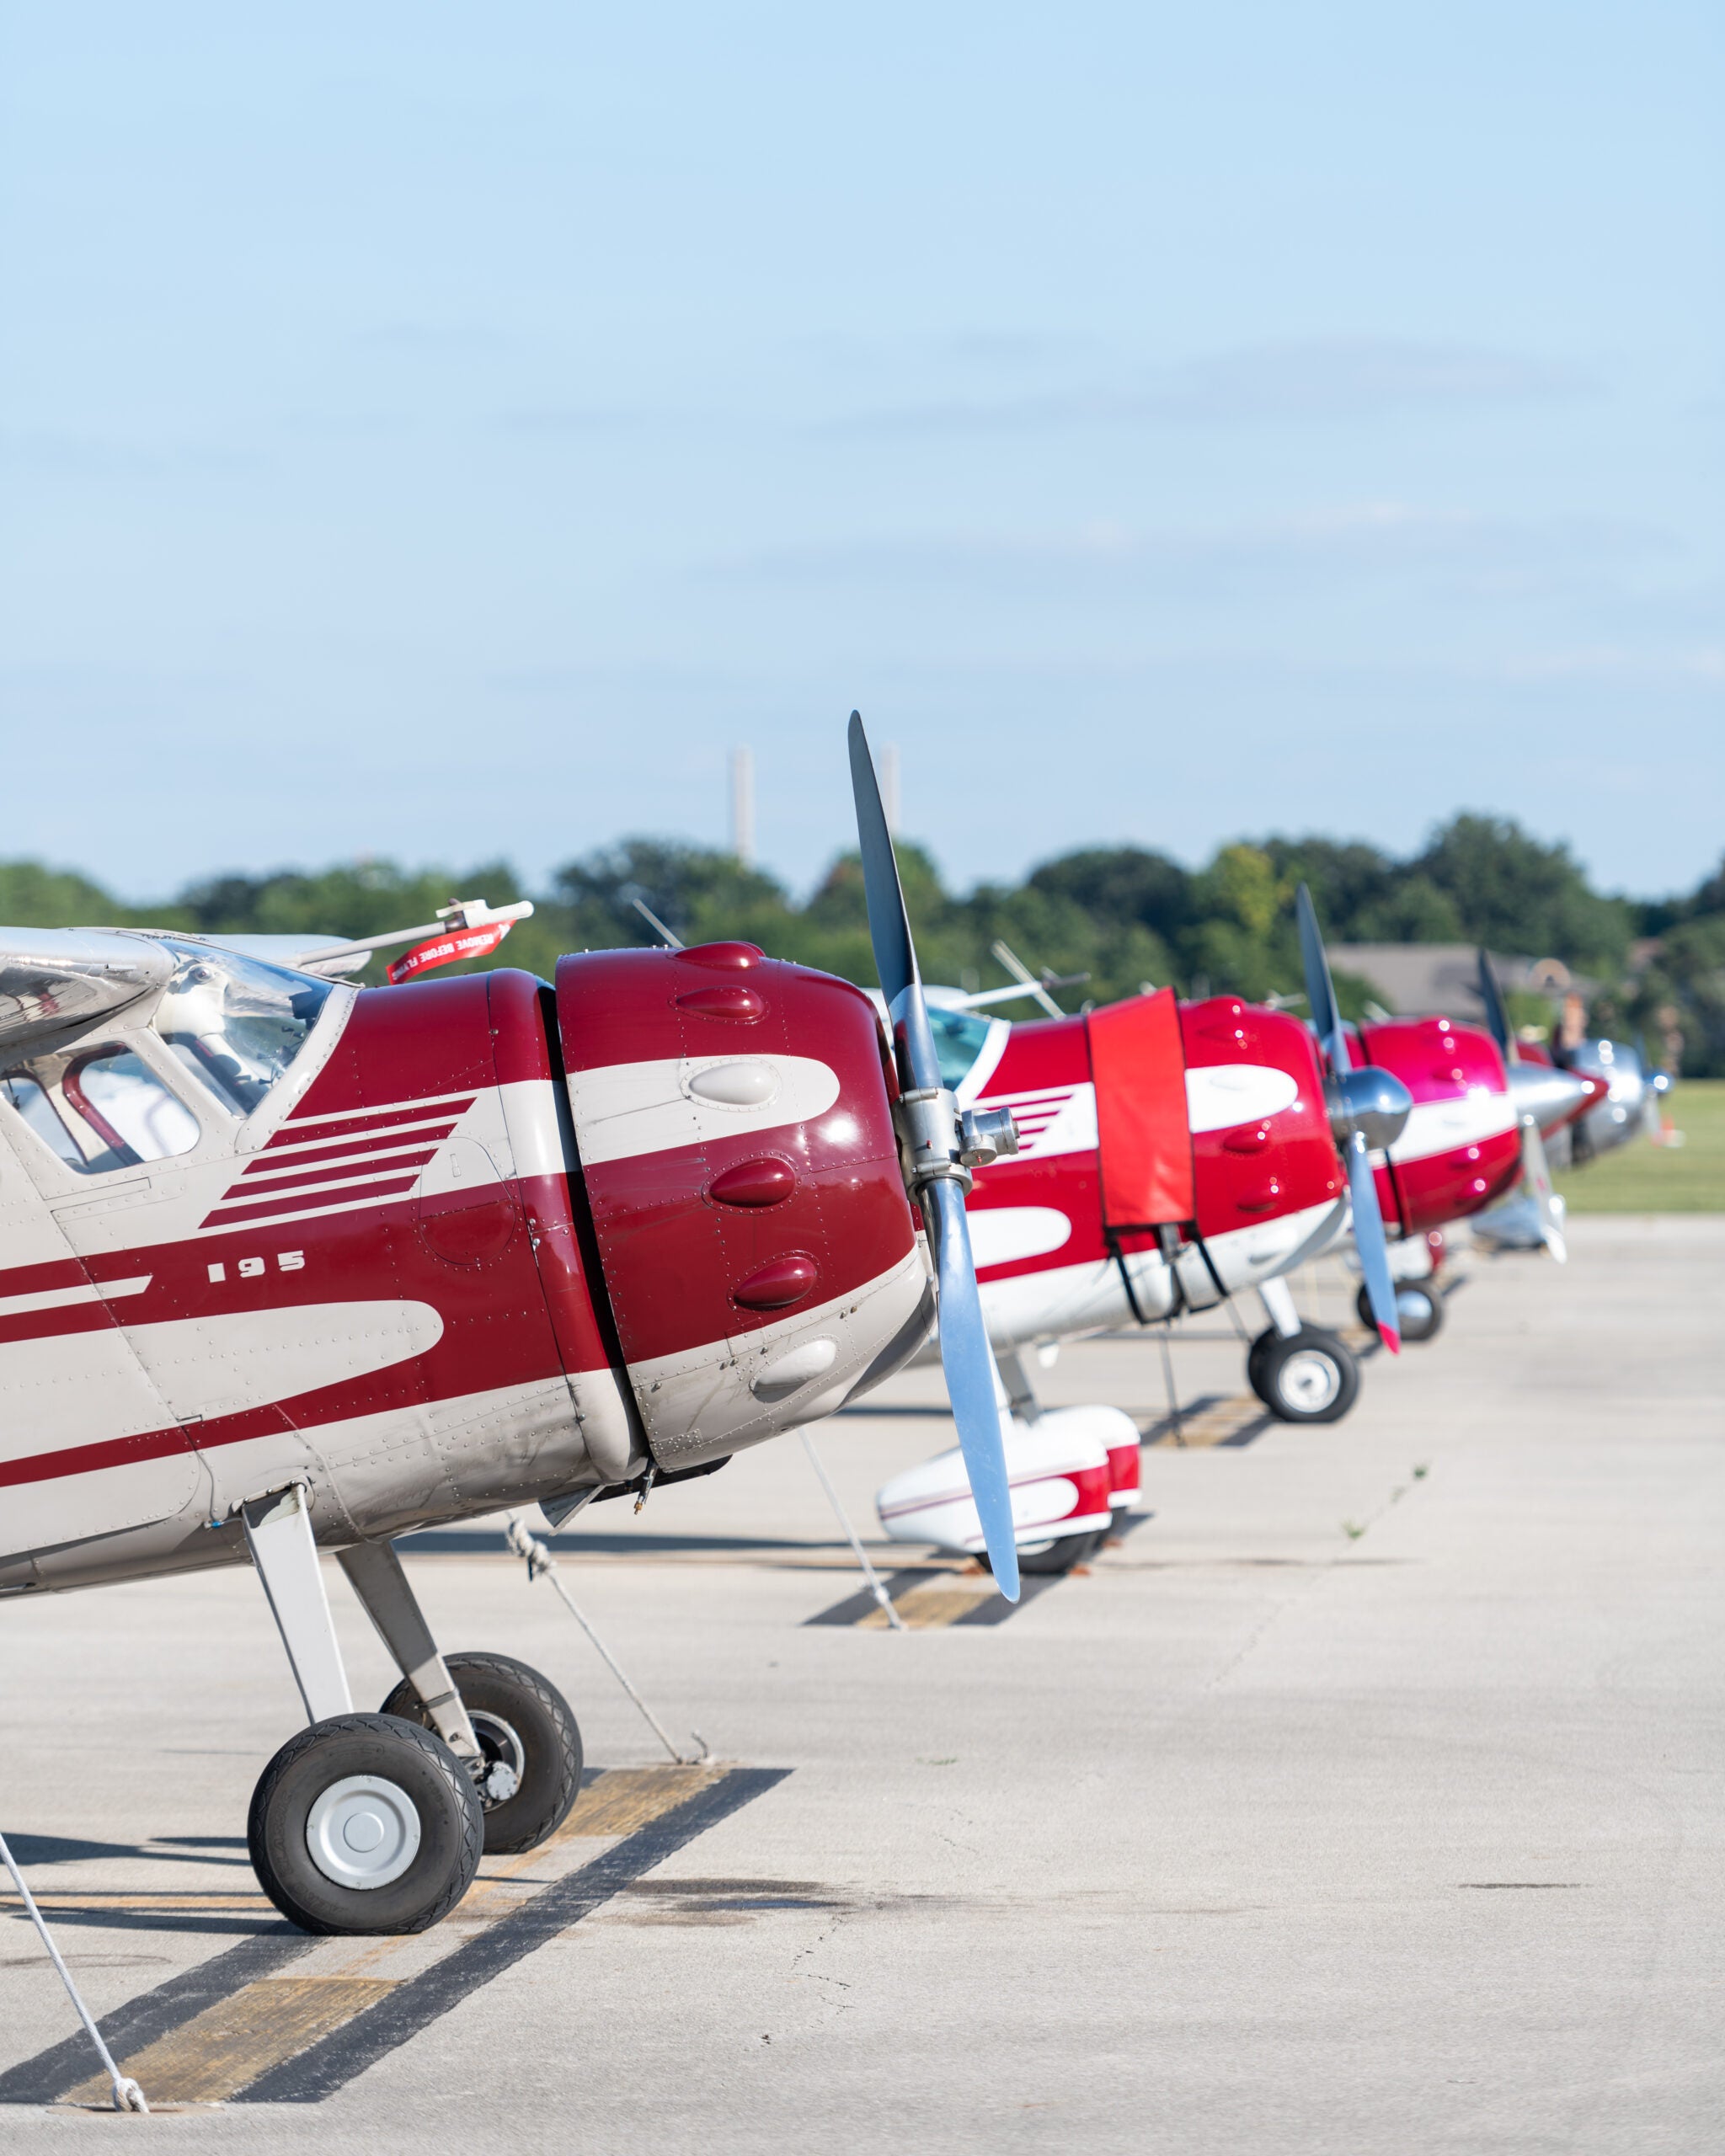 Cessna 195s lined up on a runway